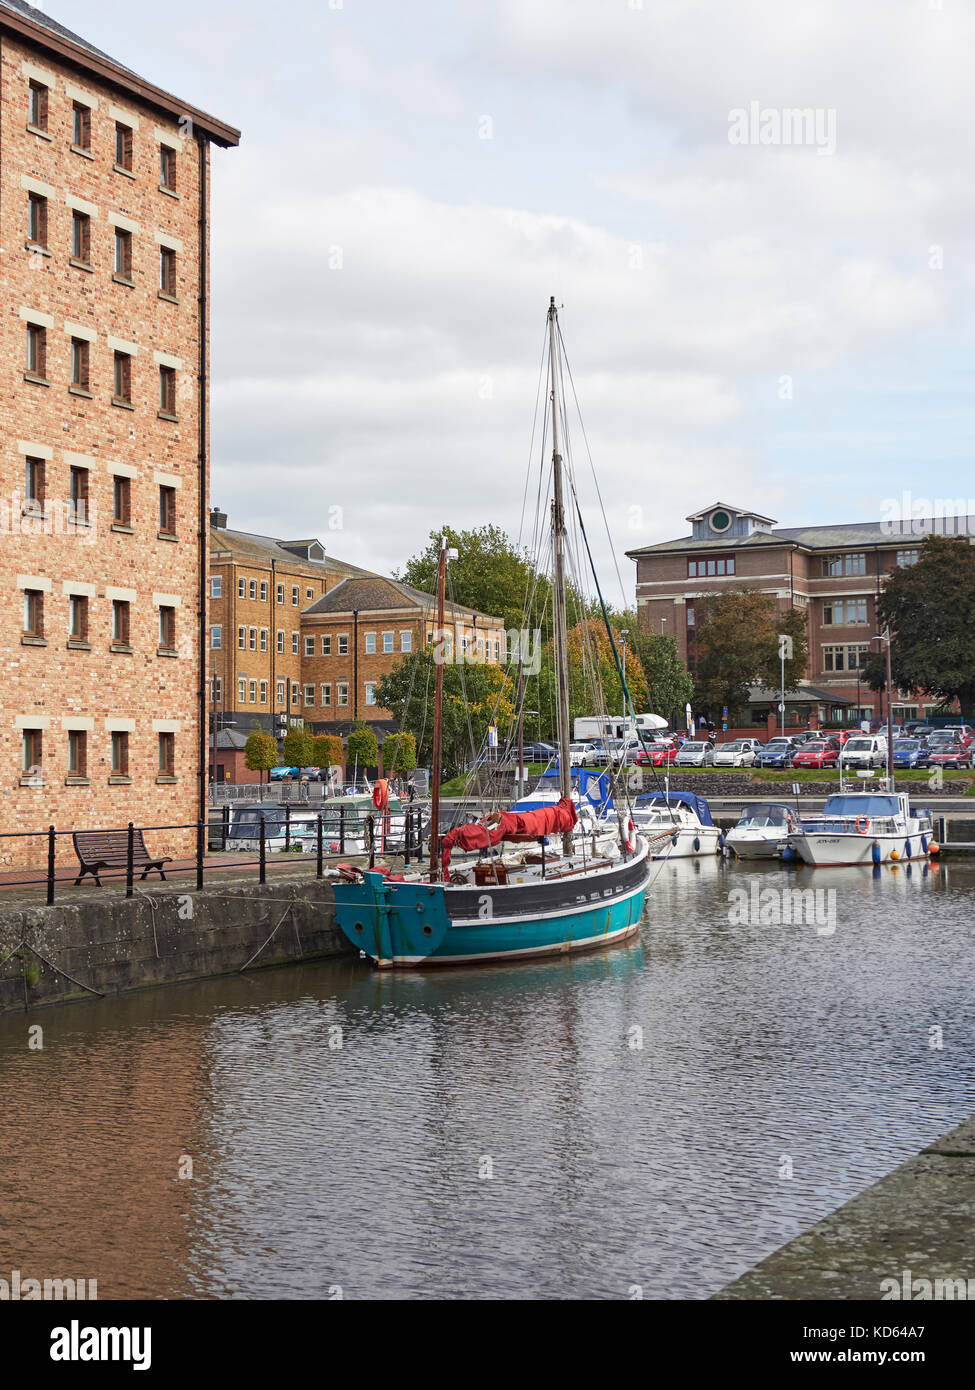 The City of Gloucester and Gloucester docks and warehouses Stock Photo